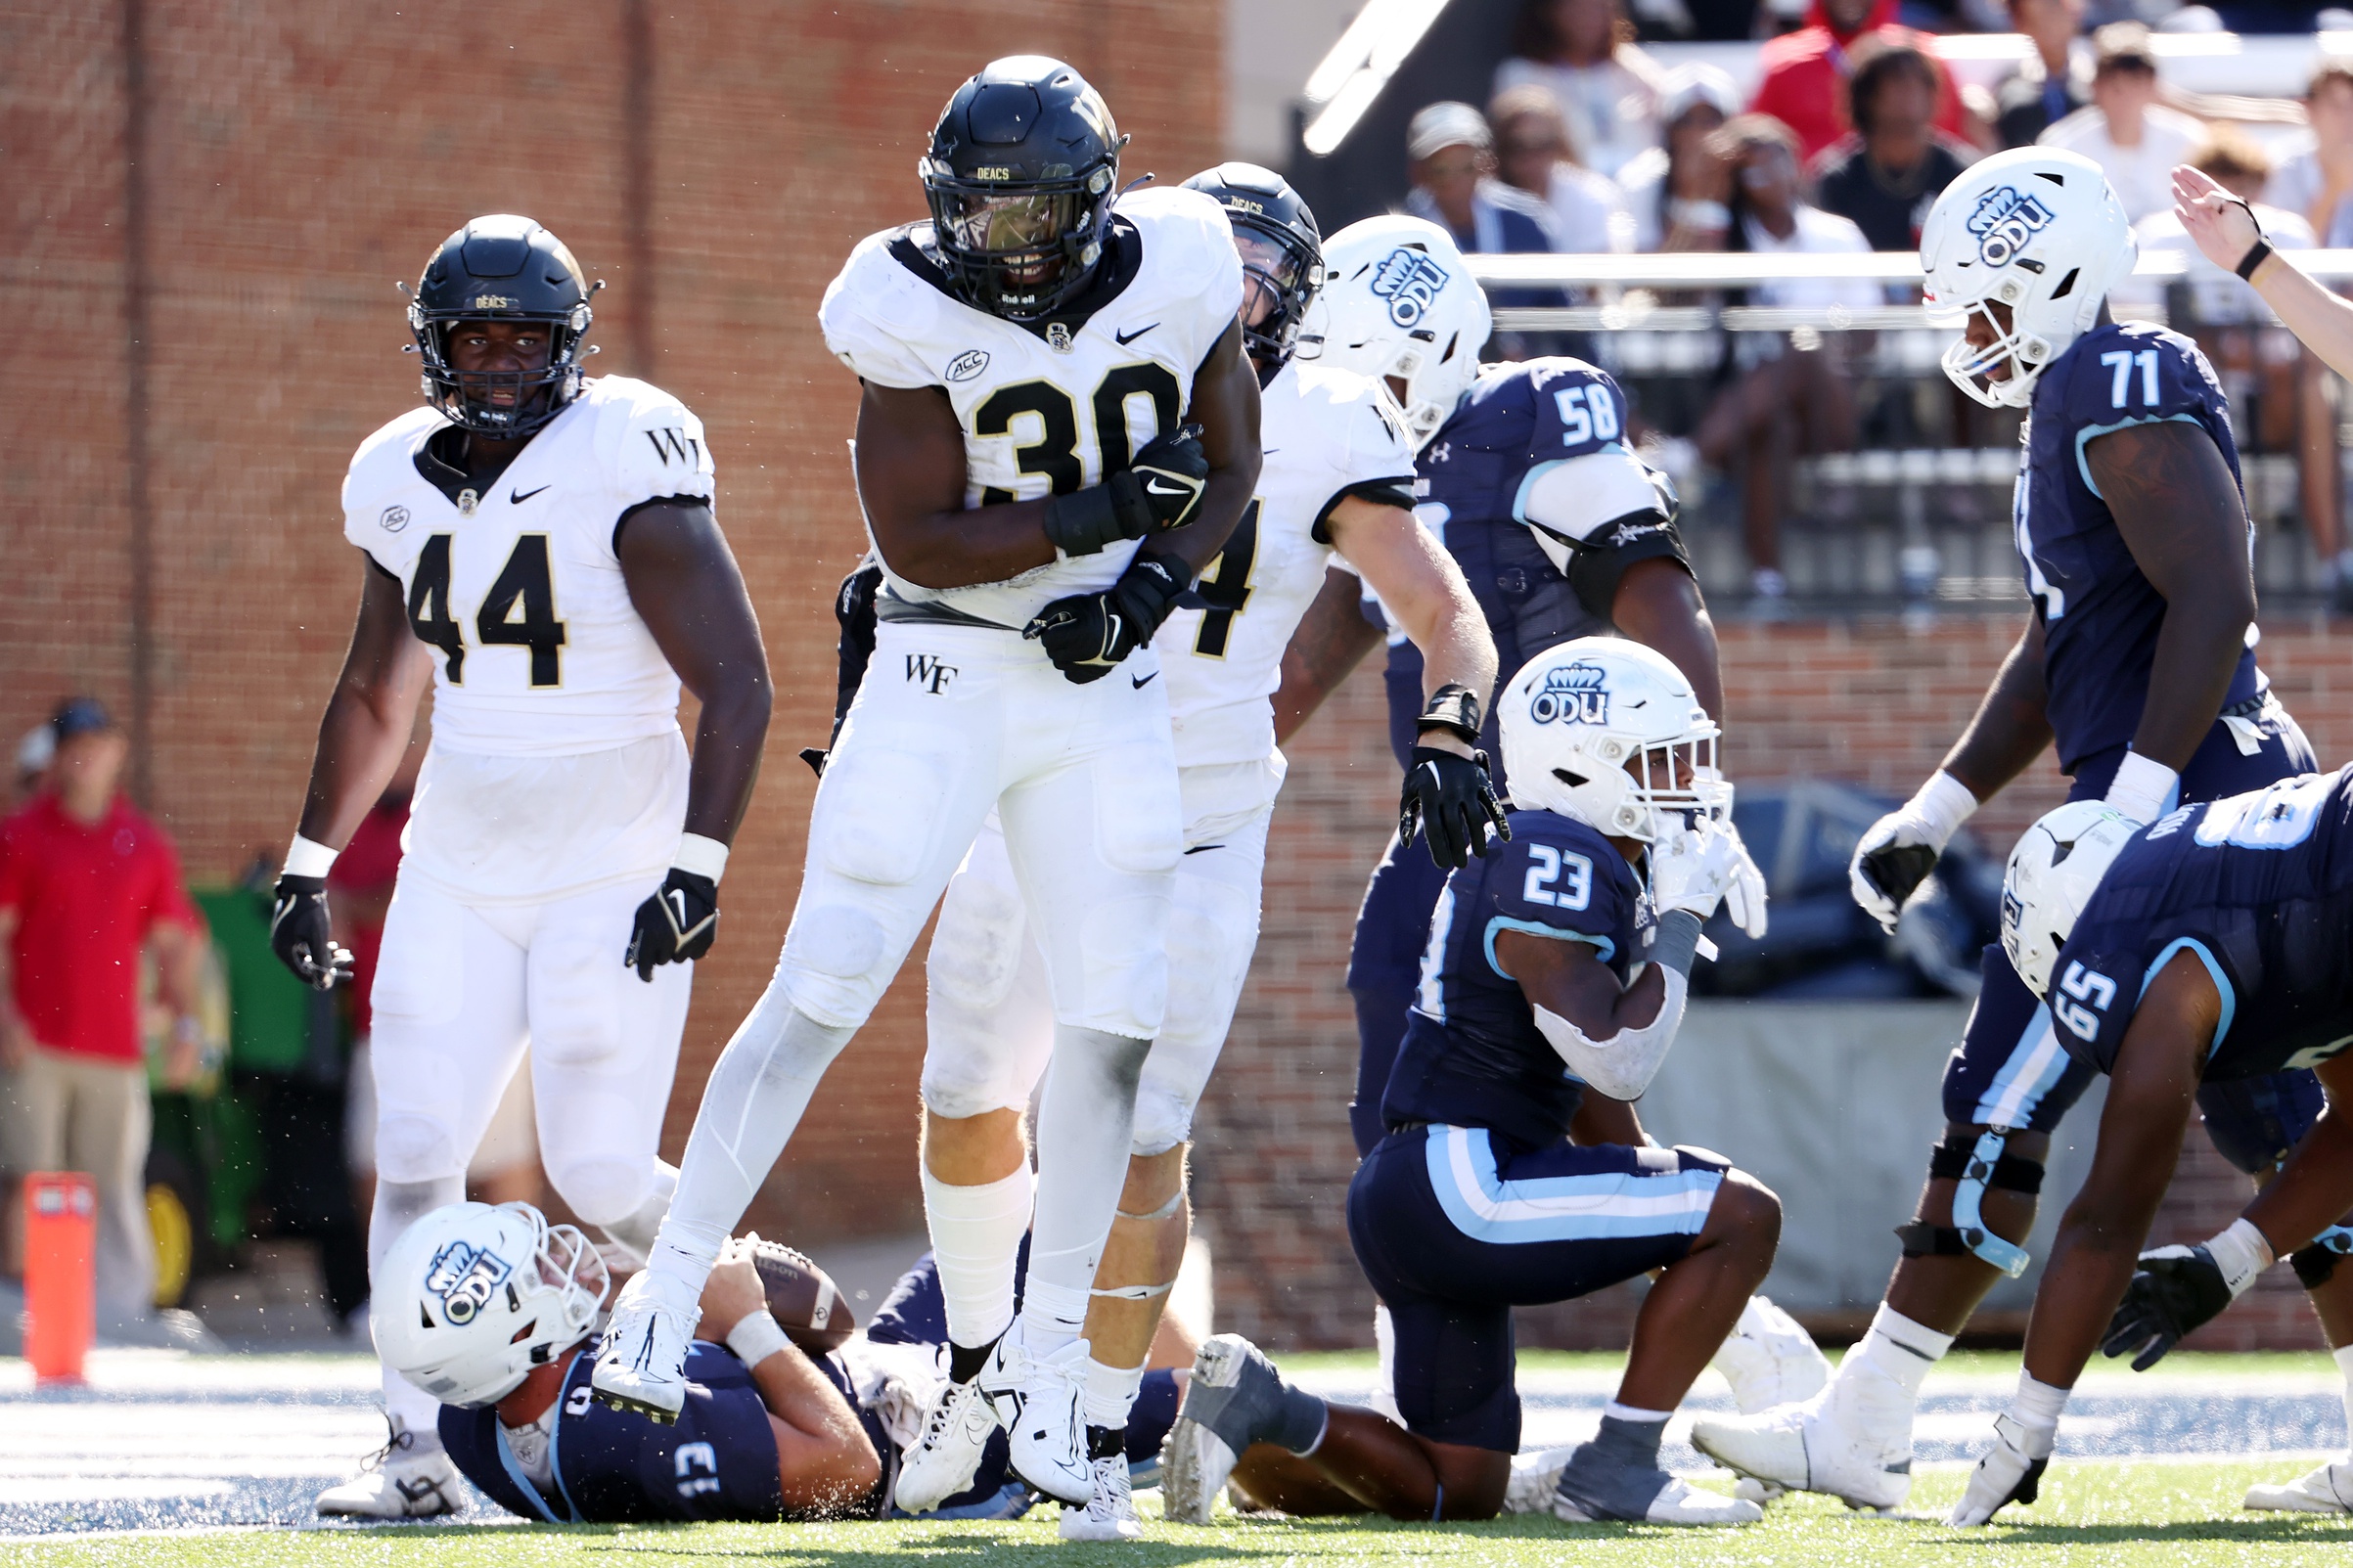 The Wake Forest Defense Is Going Through a Metamorphosis